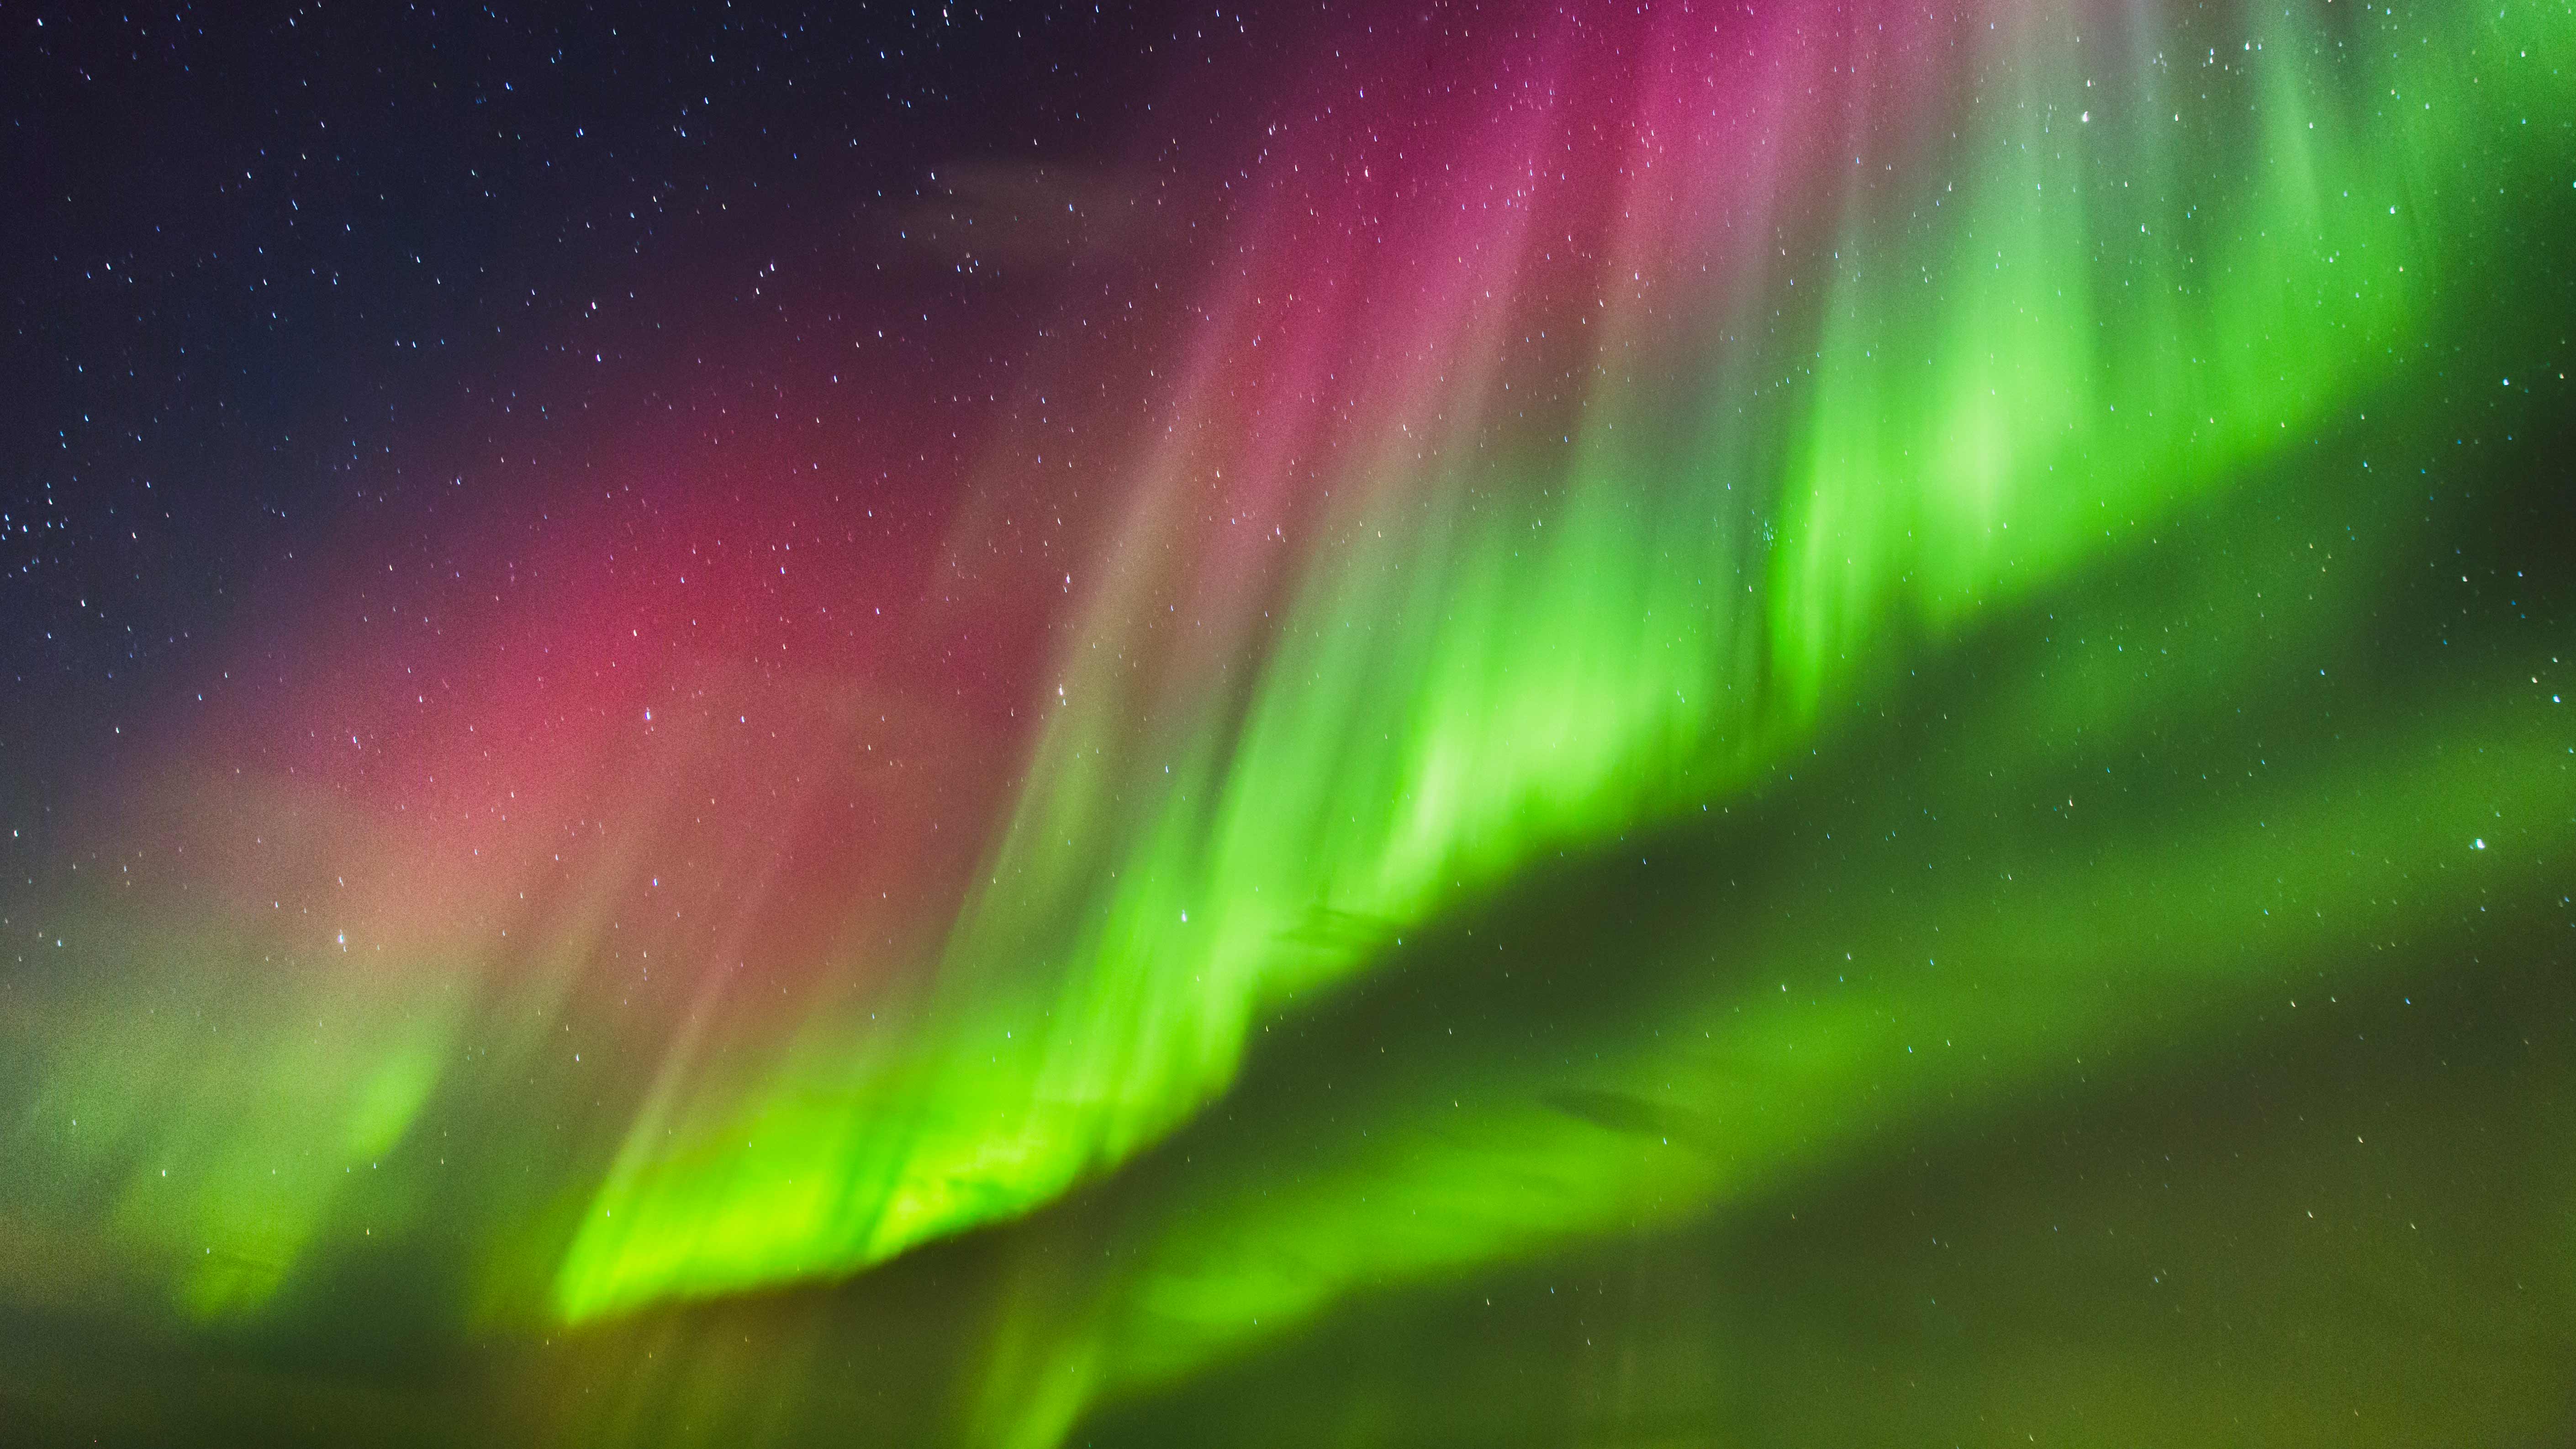 6 of the best places to photograph the Northern Lights in Alaska